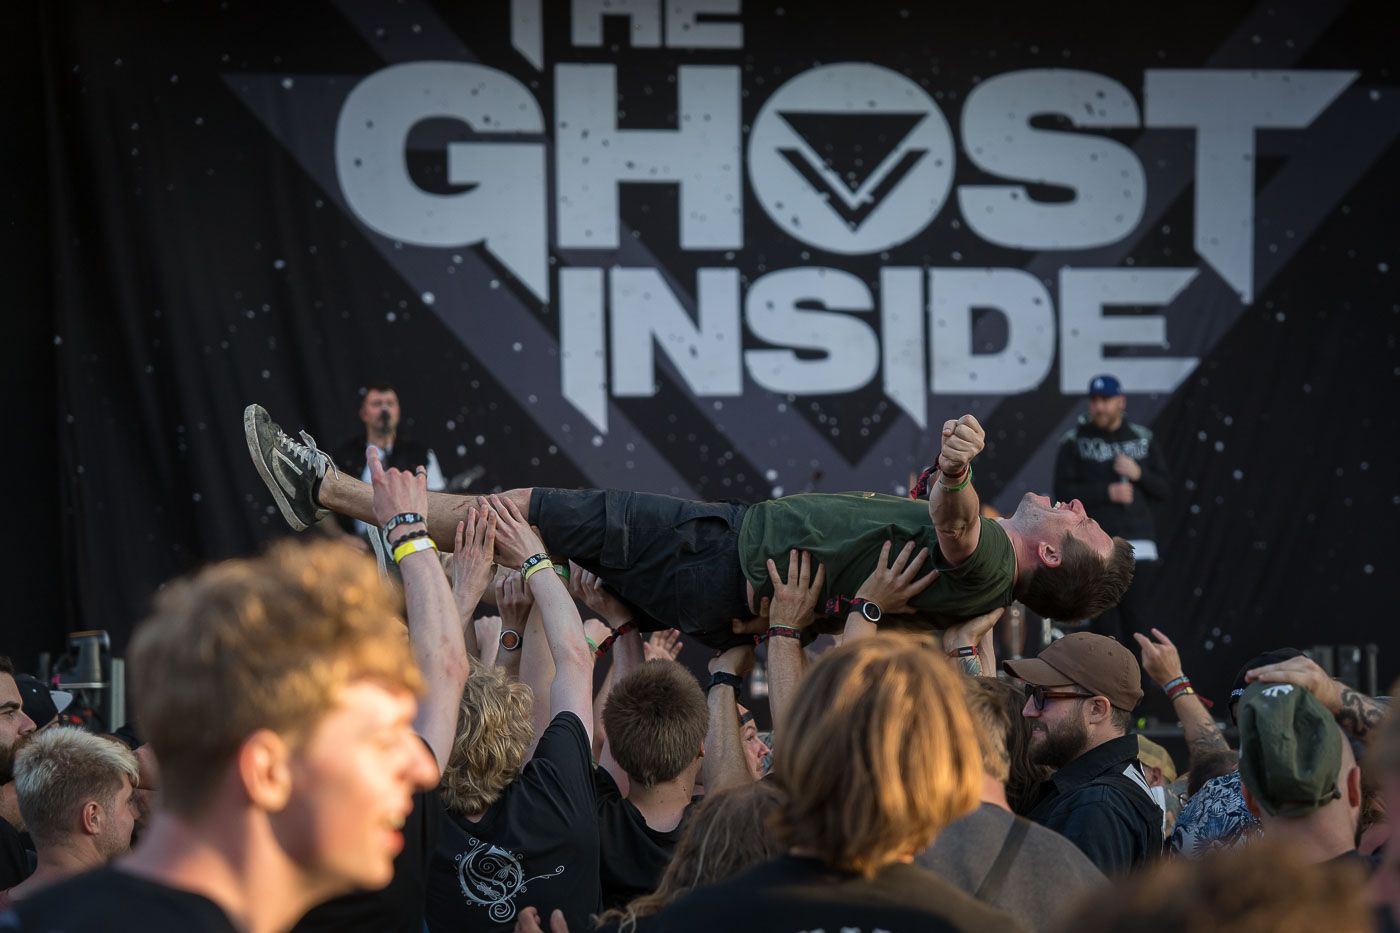 The Ghost Inside @ Copenhell